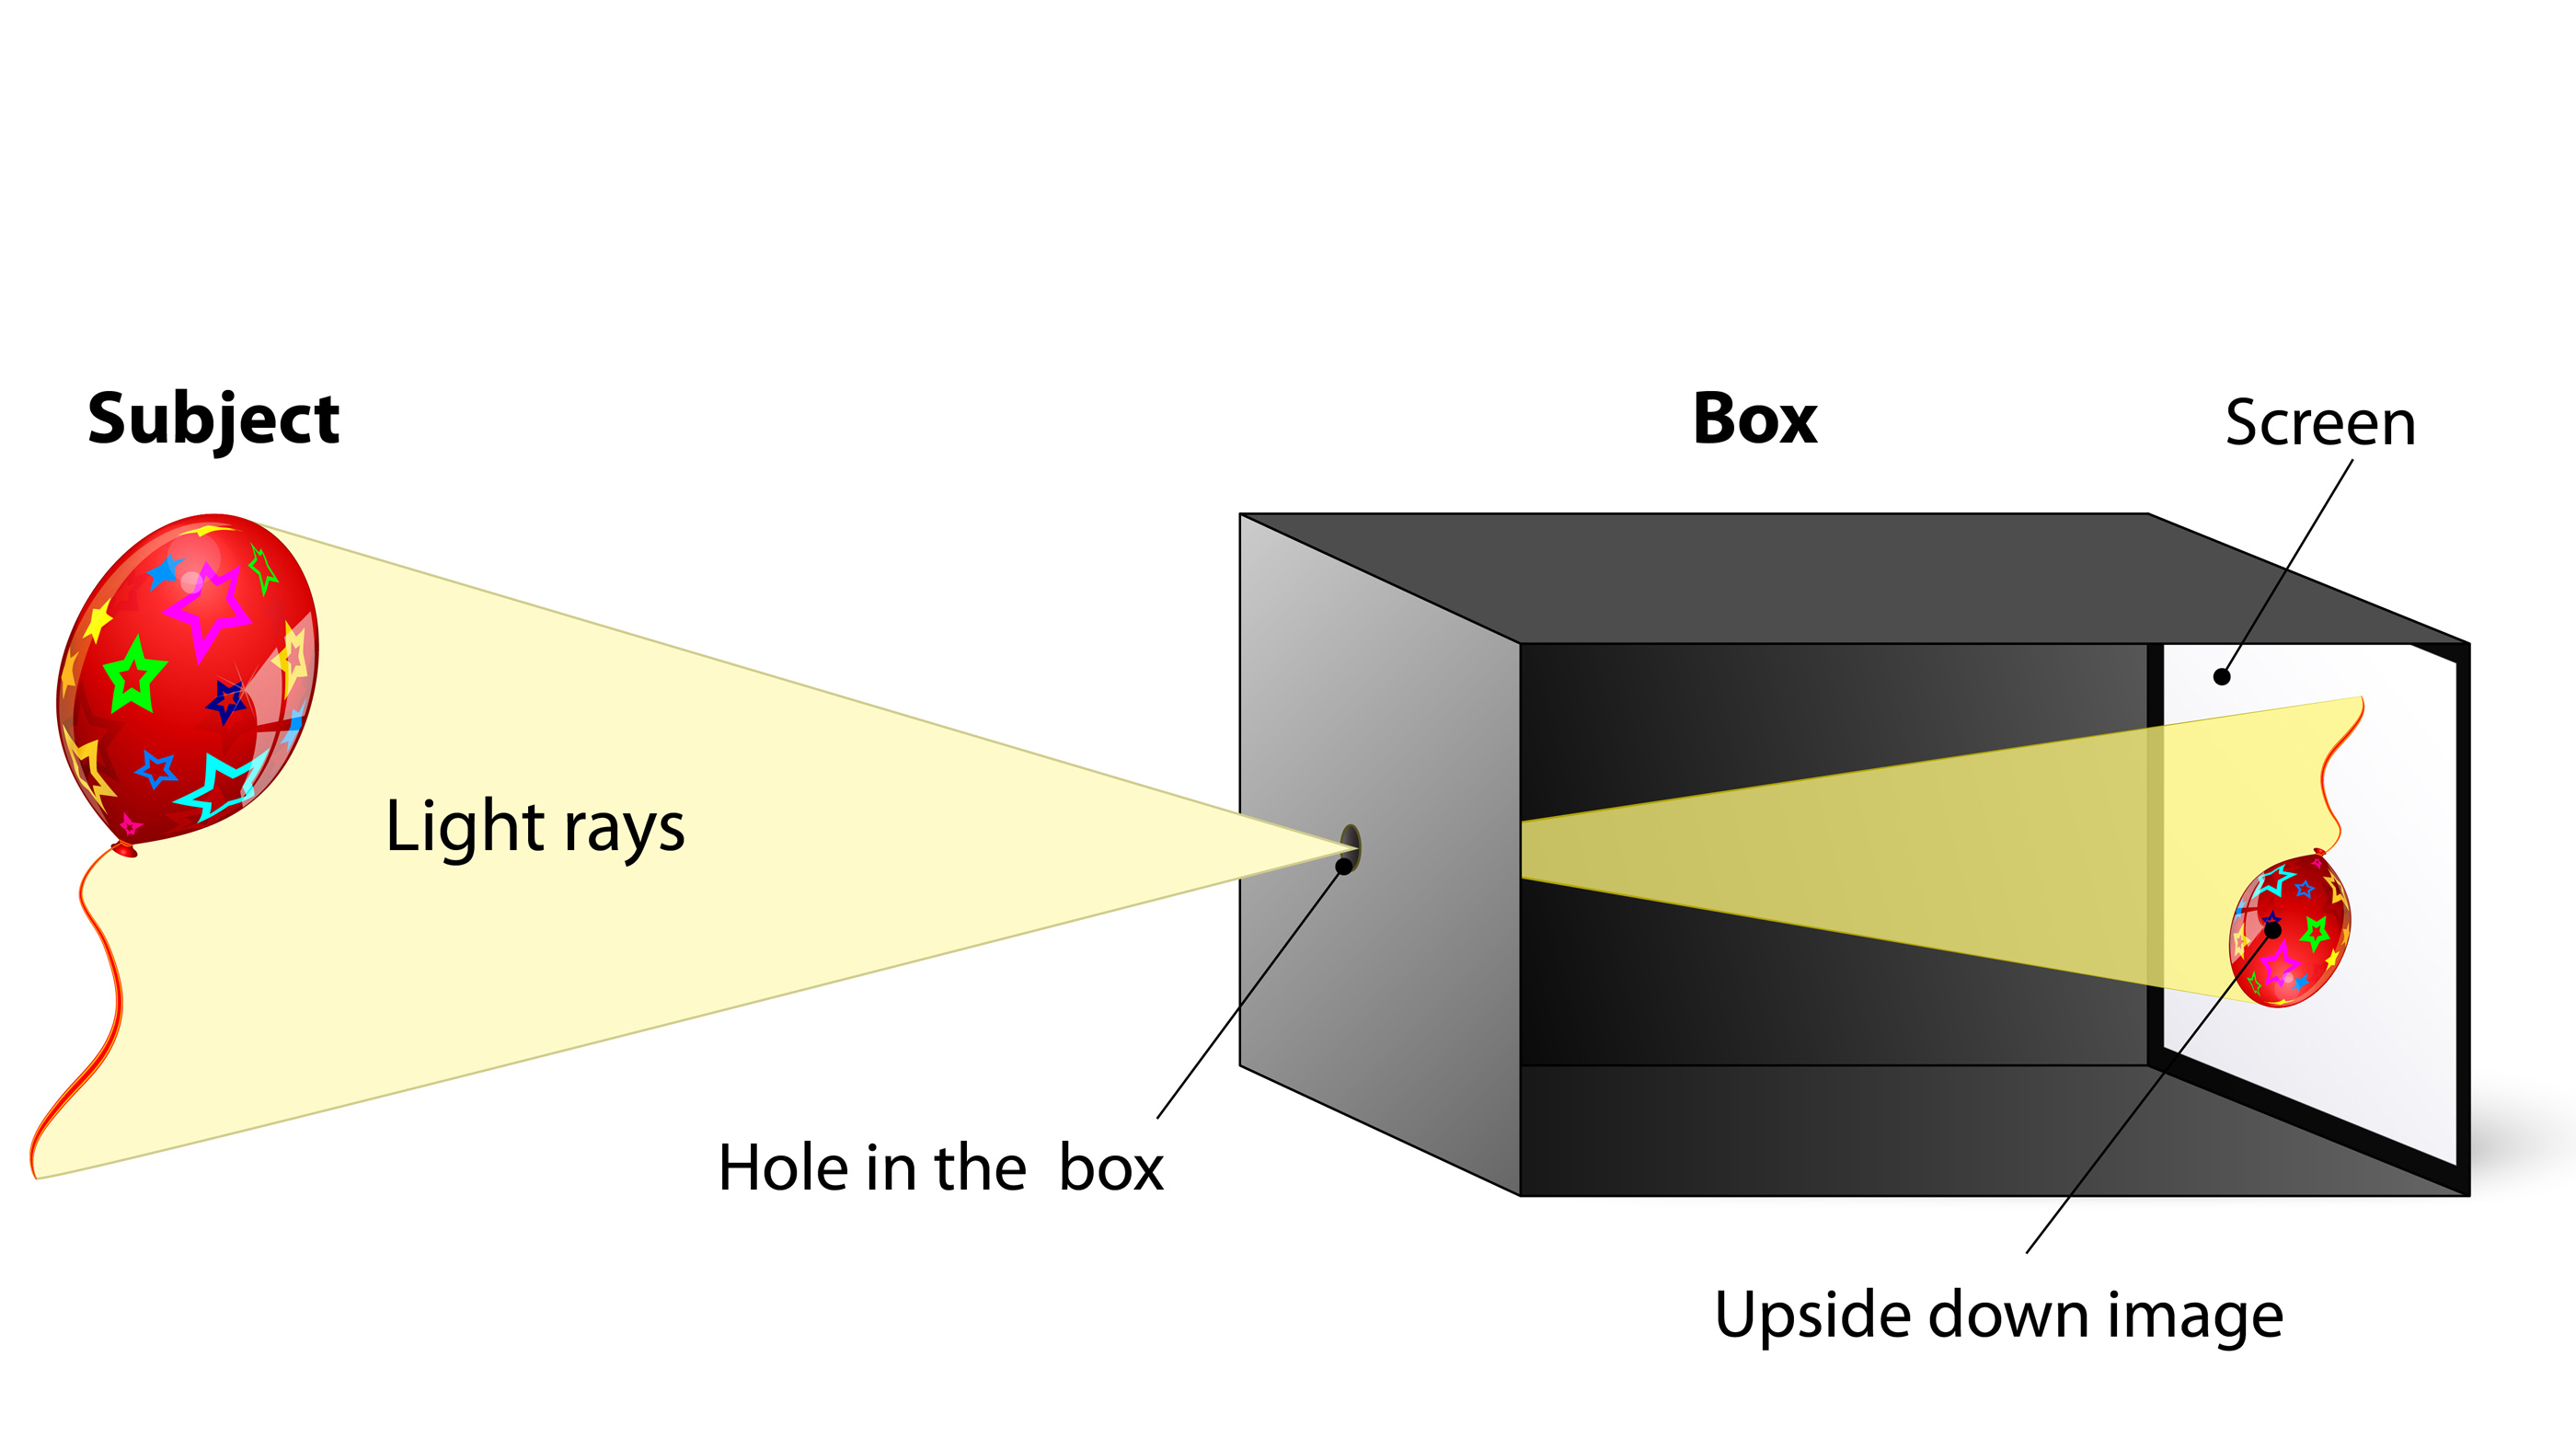 Here's a look at how a pinhole camera works. For a solar eclipse, the sun would replace the balloon in the illustration.